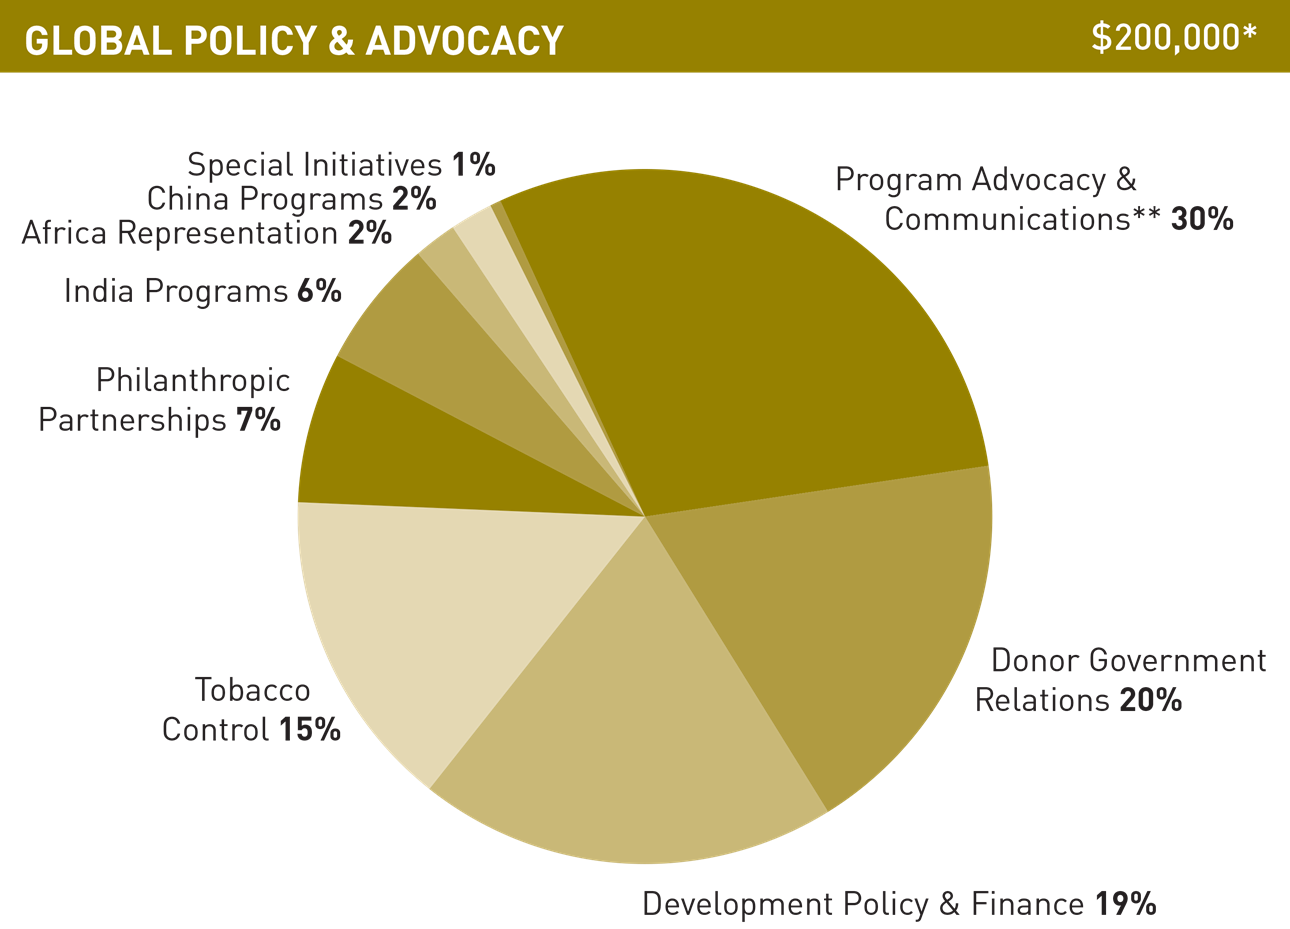 Gates Foundation Annual Report 2014 Global Policy and Advocacy